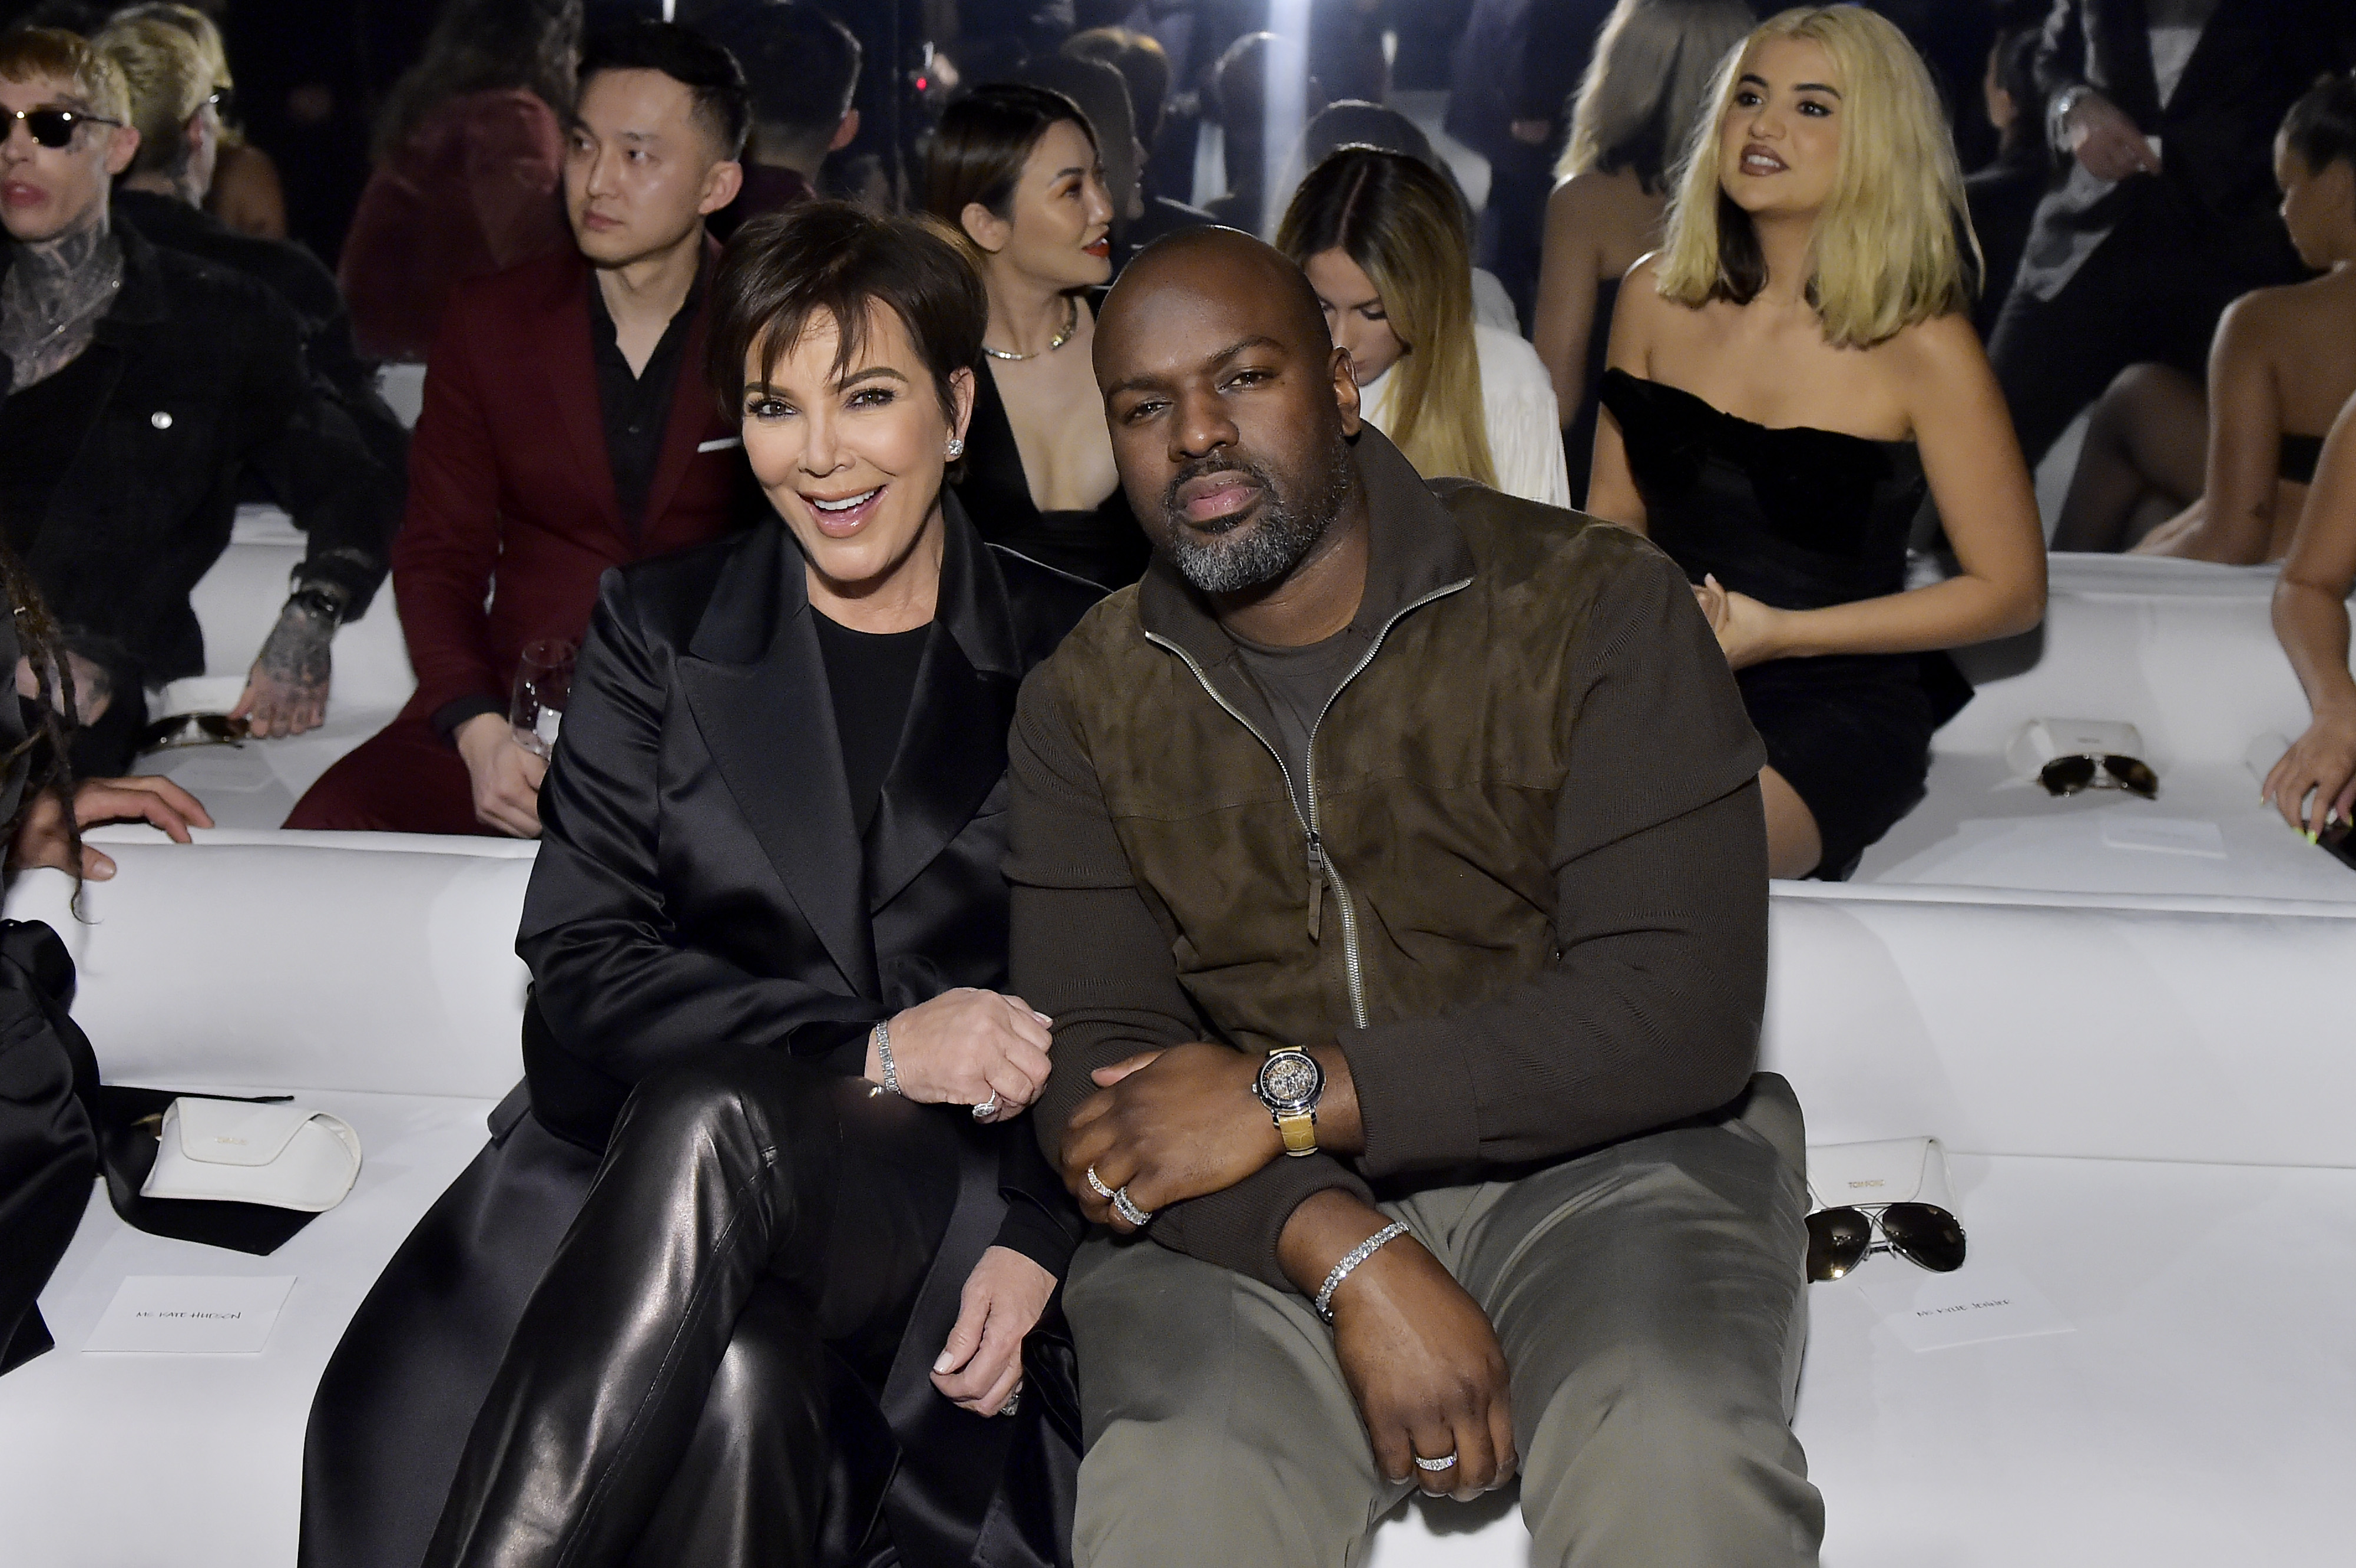 Kris Jenner and boyfriend, Corey Gamble, sitting front row at a fashion show.